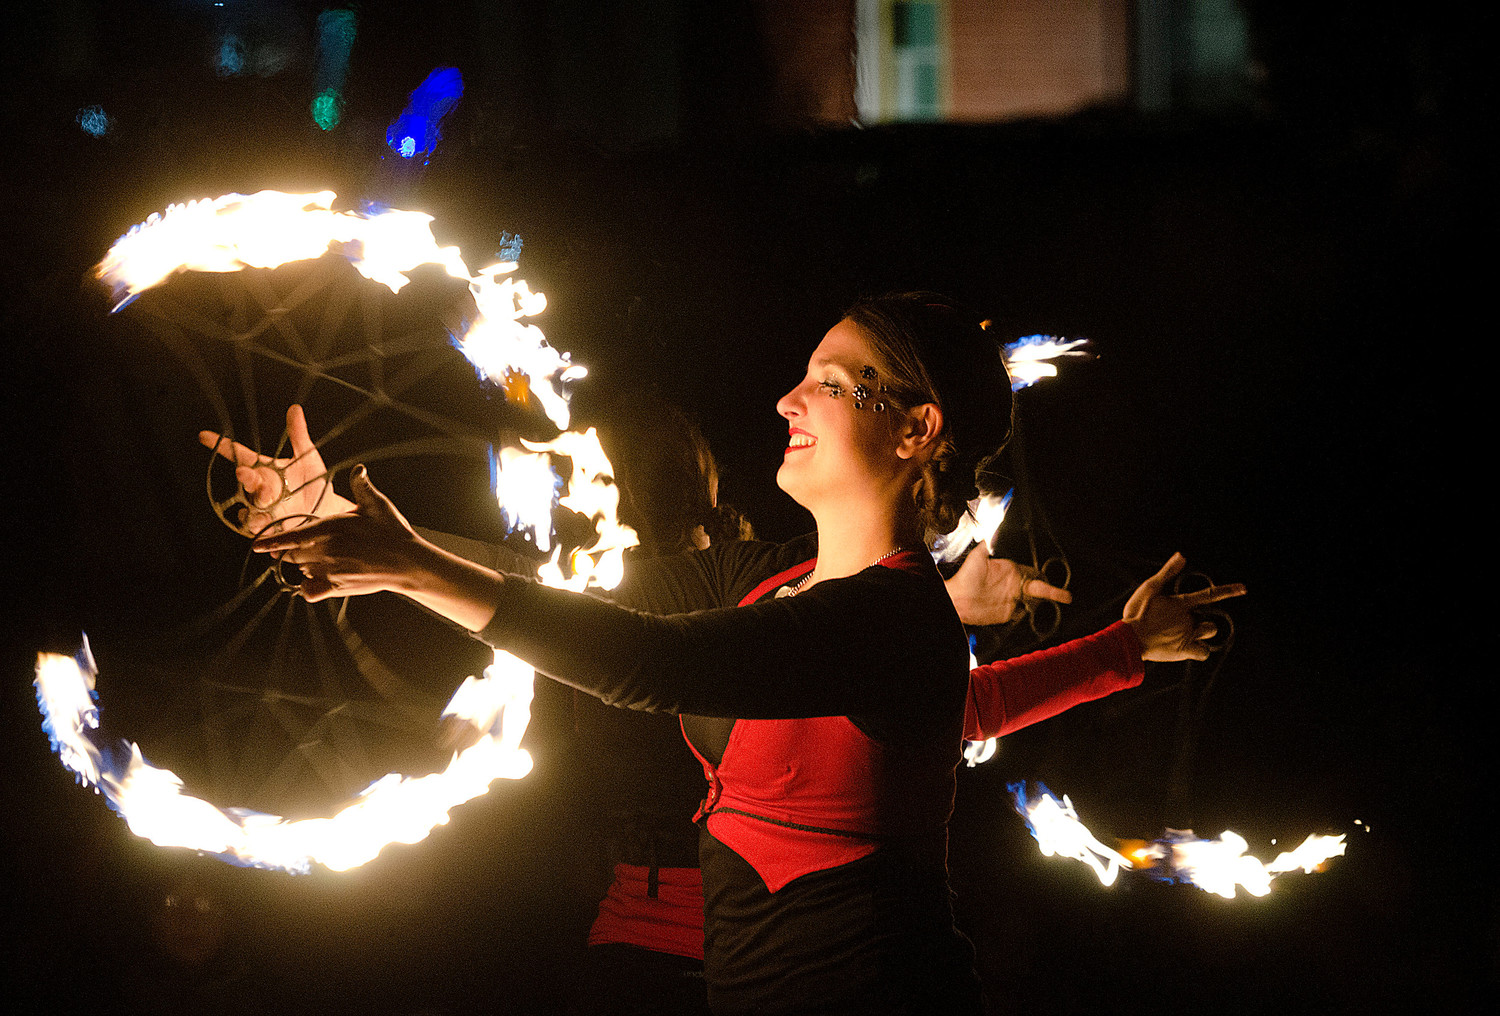 Casey Acacia of Circus Dynamics spins fire during their show on Narragansett Way.